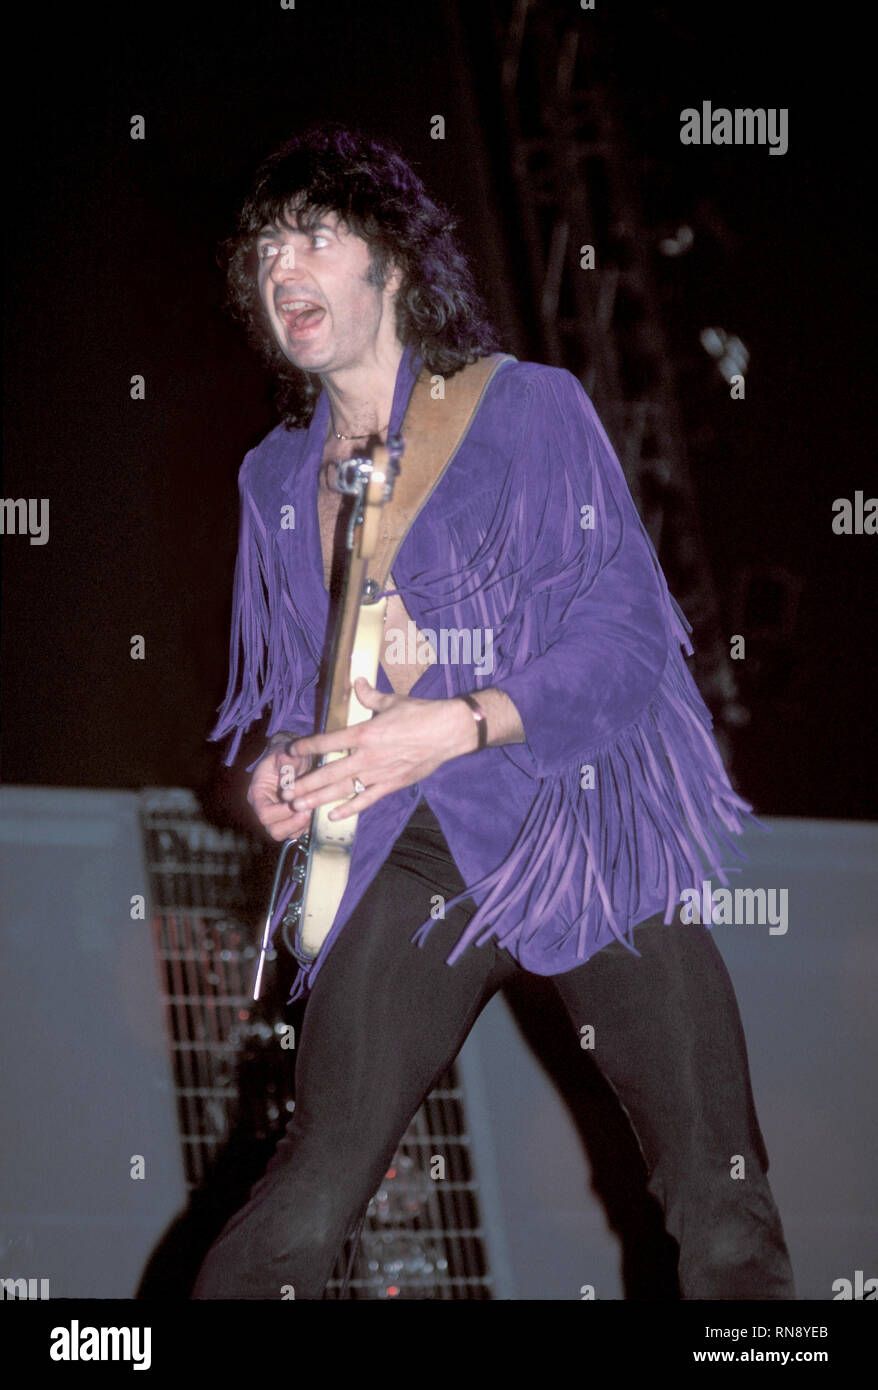 Deep Purple guitarist and leader Richie Blackmore is shown performing onstage during a 'live' concert appearance. Stock Photo